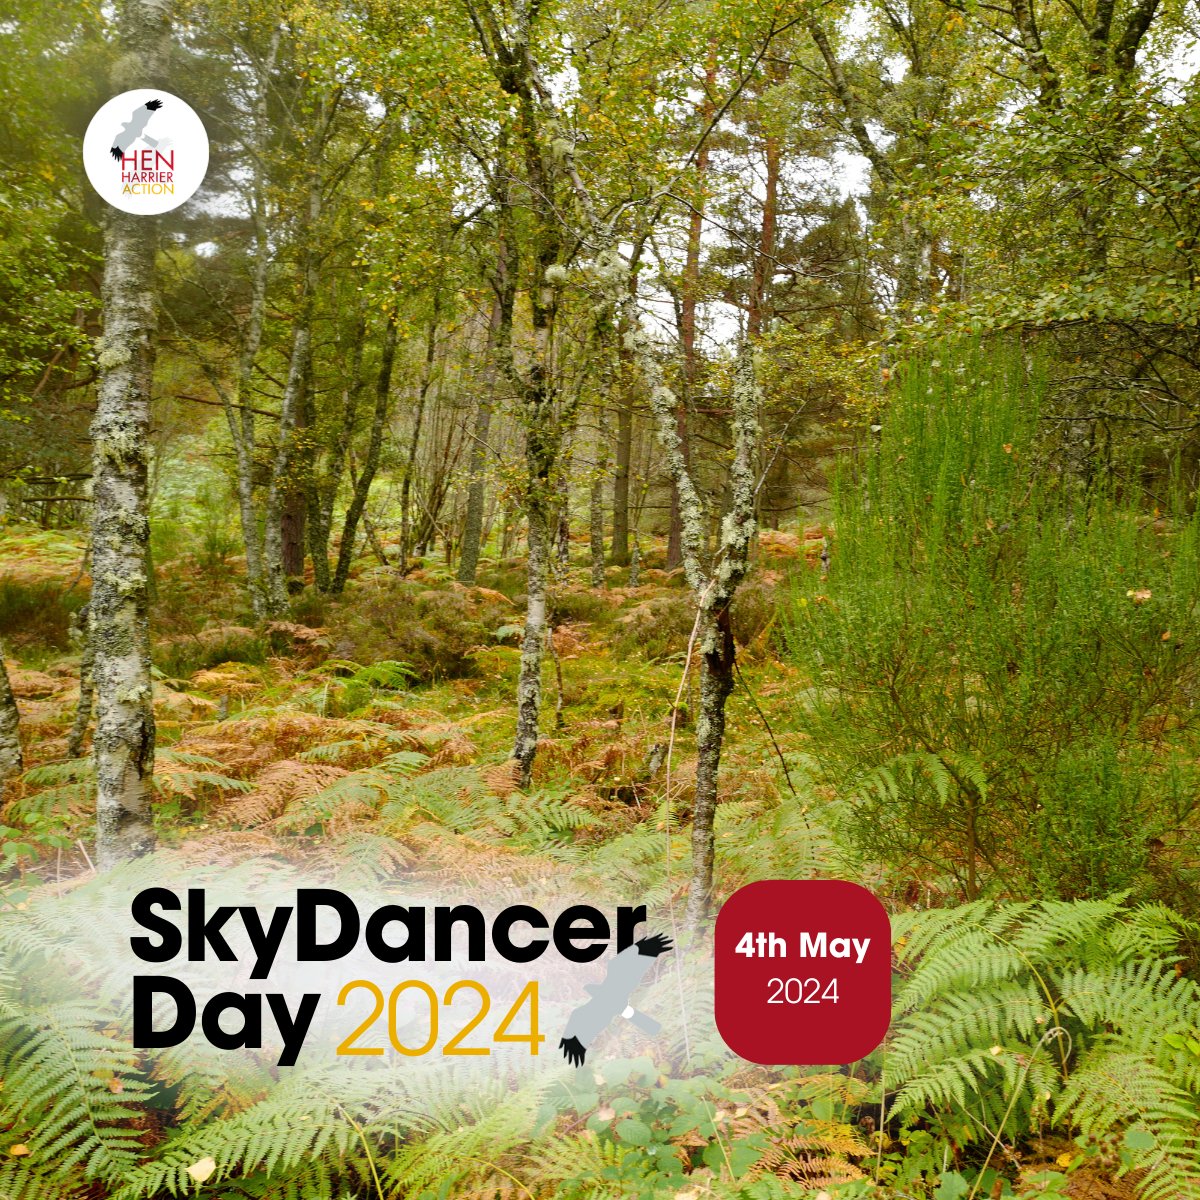 During #SkyDancerDay2024 we will profile @treesforlife at the new Dundreggan Rewildling Centre, aiming to provide education about the natural and cultural heritage of the Highlands. 🏴󠁧󠁢󠁳󠁣󠁴󠁿

🗓️Don't miss the Live Broadcast: 4th May, 11.00 (BST)

📺Watch Here: youtube.com/watch?v=kNnVDd…